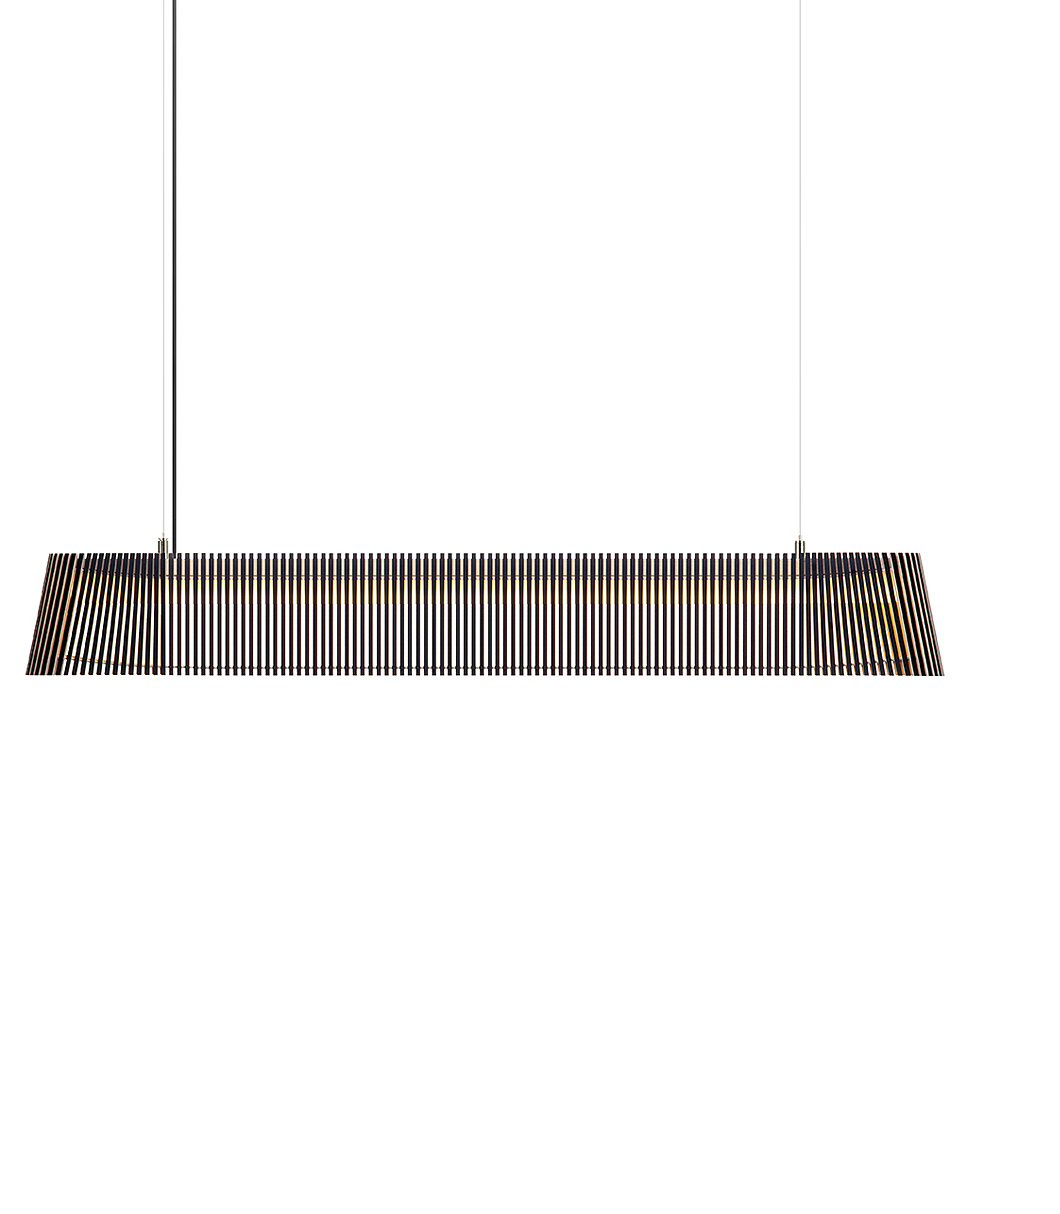 Owalo 7000 pendant is available in black laminated